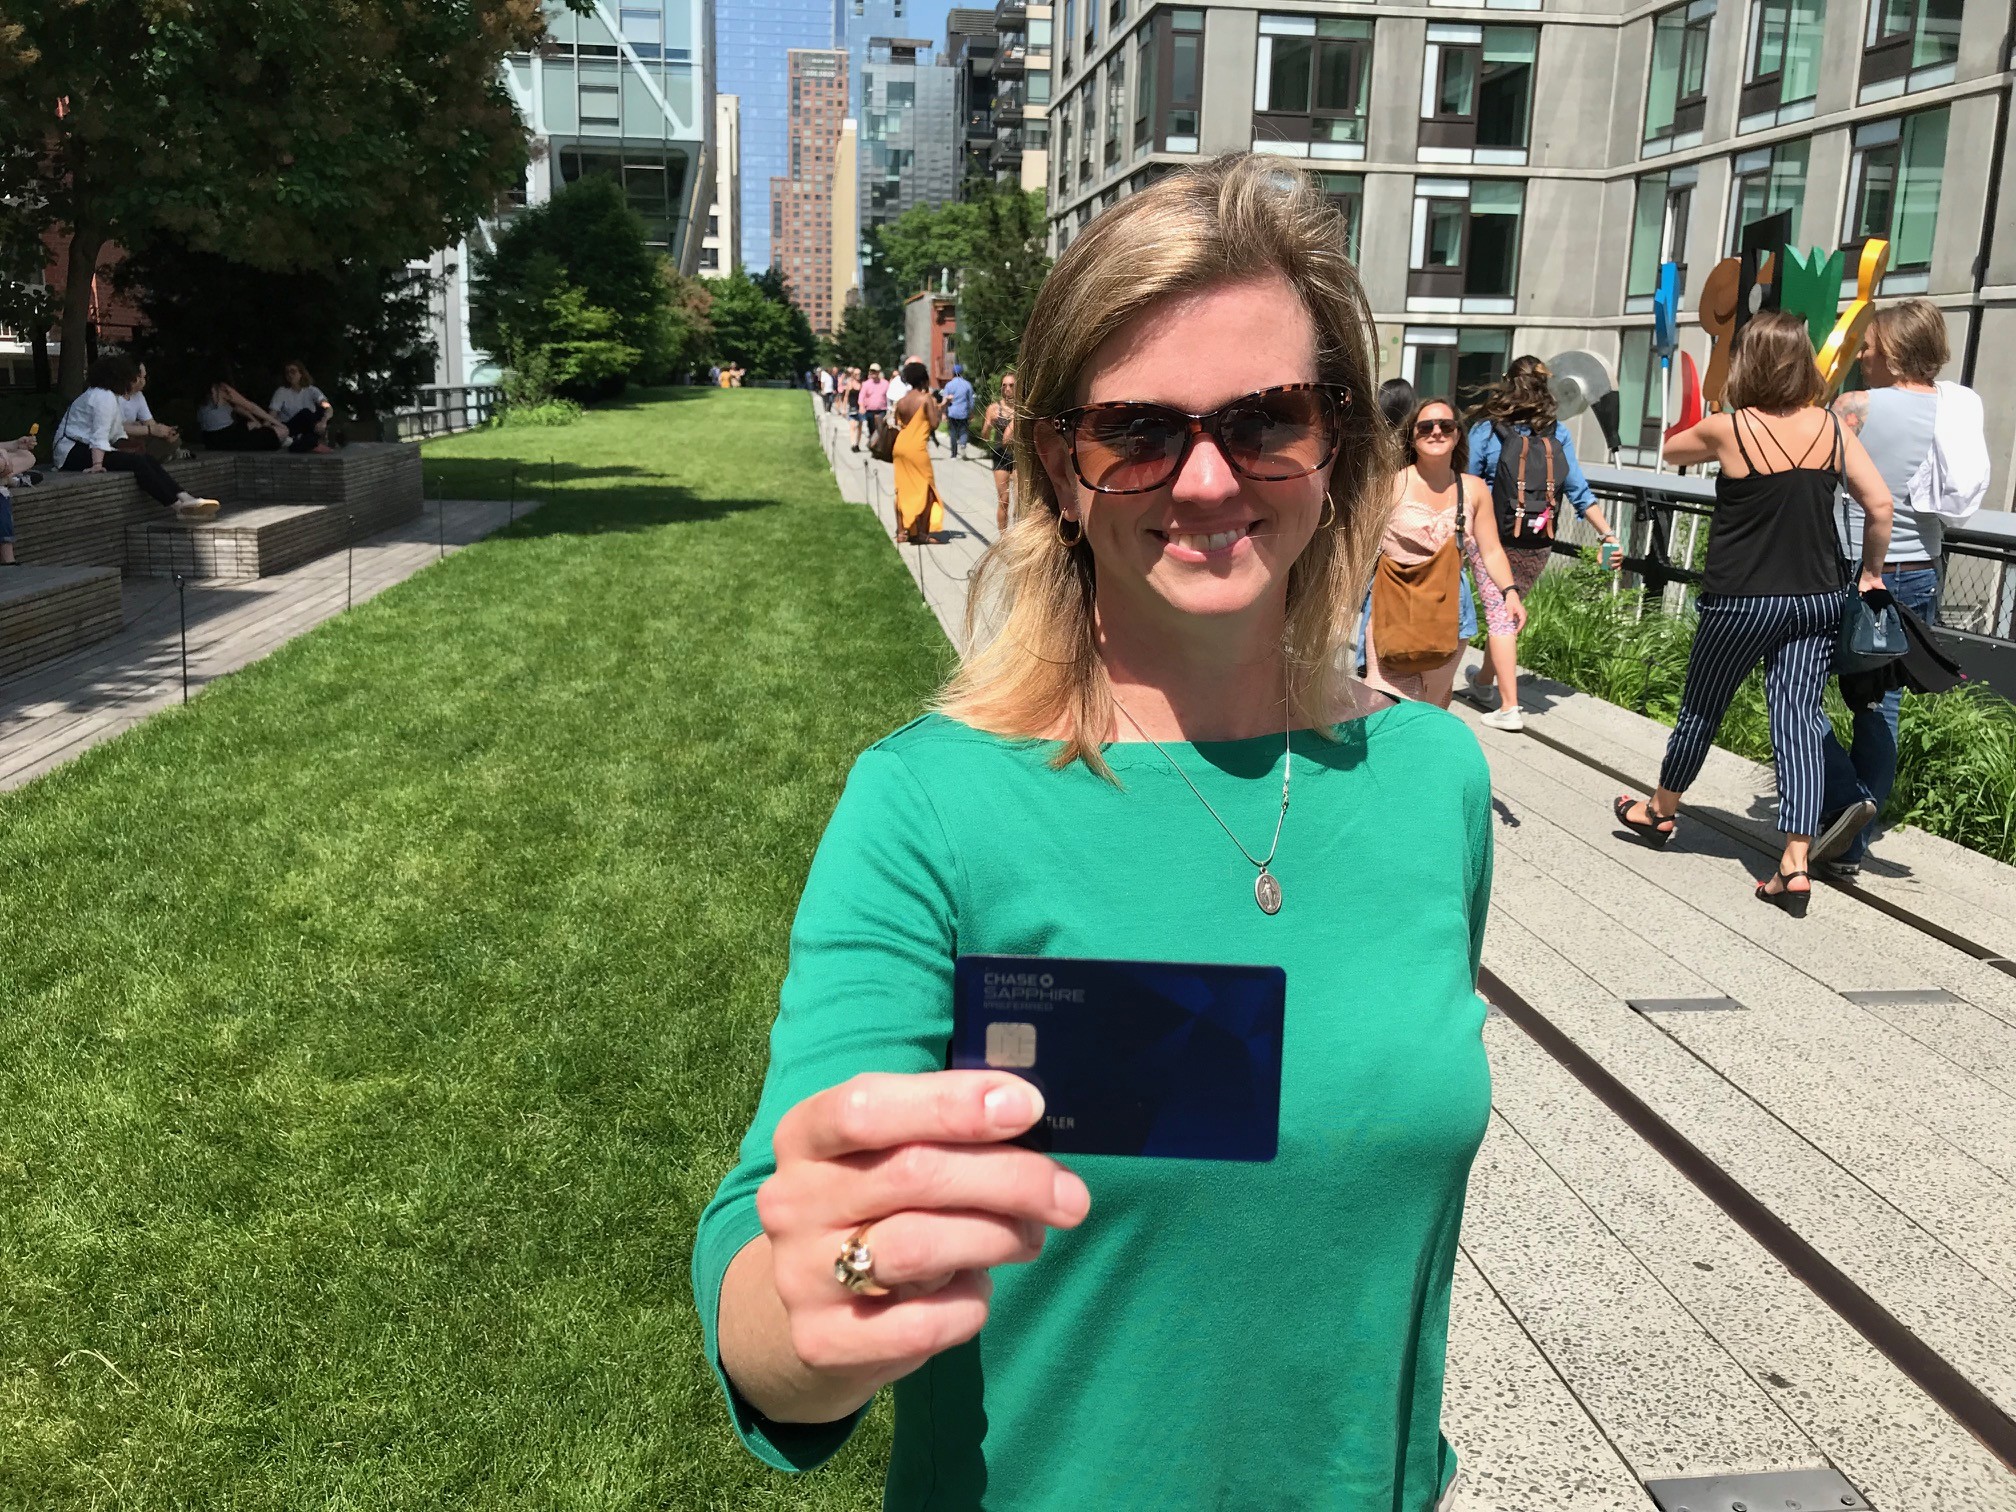 A woman proudly displaying the Southwest Priority Card on a sidewalk.